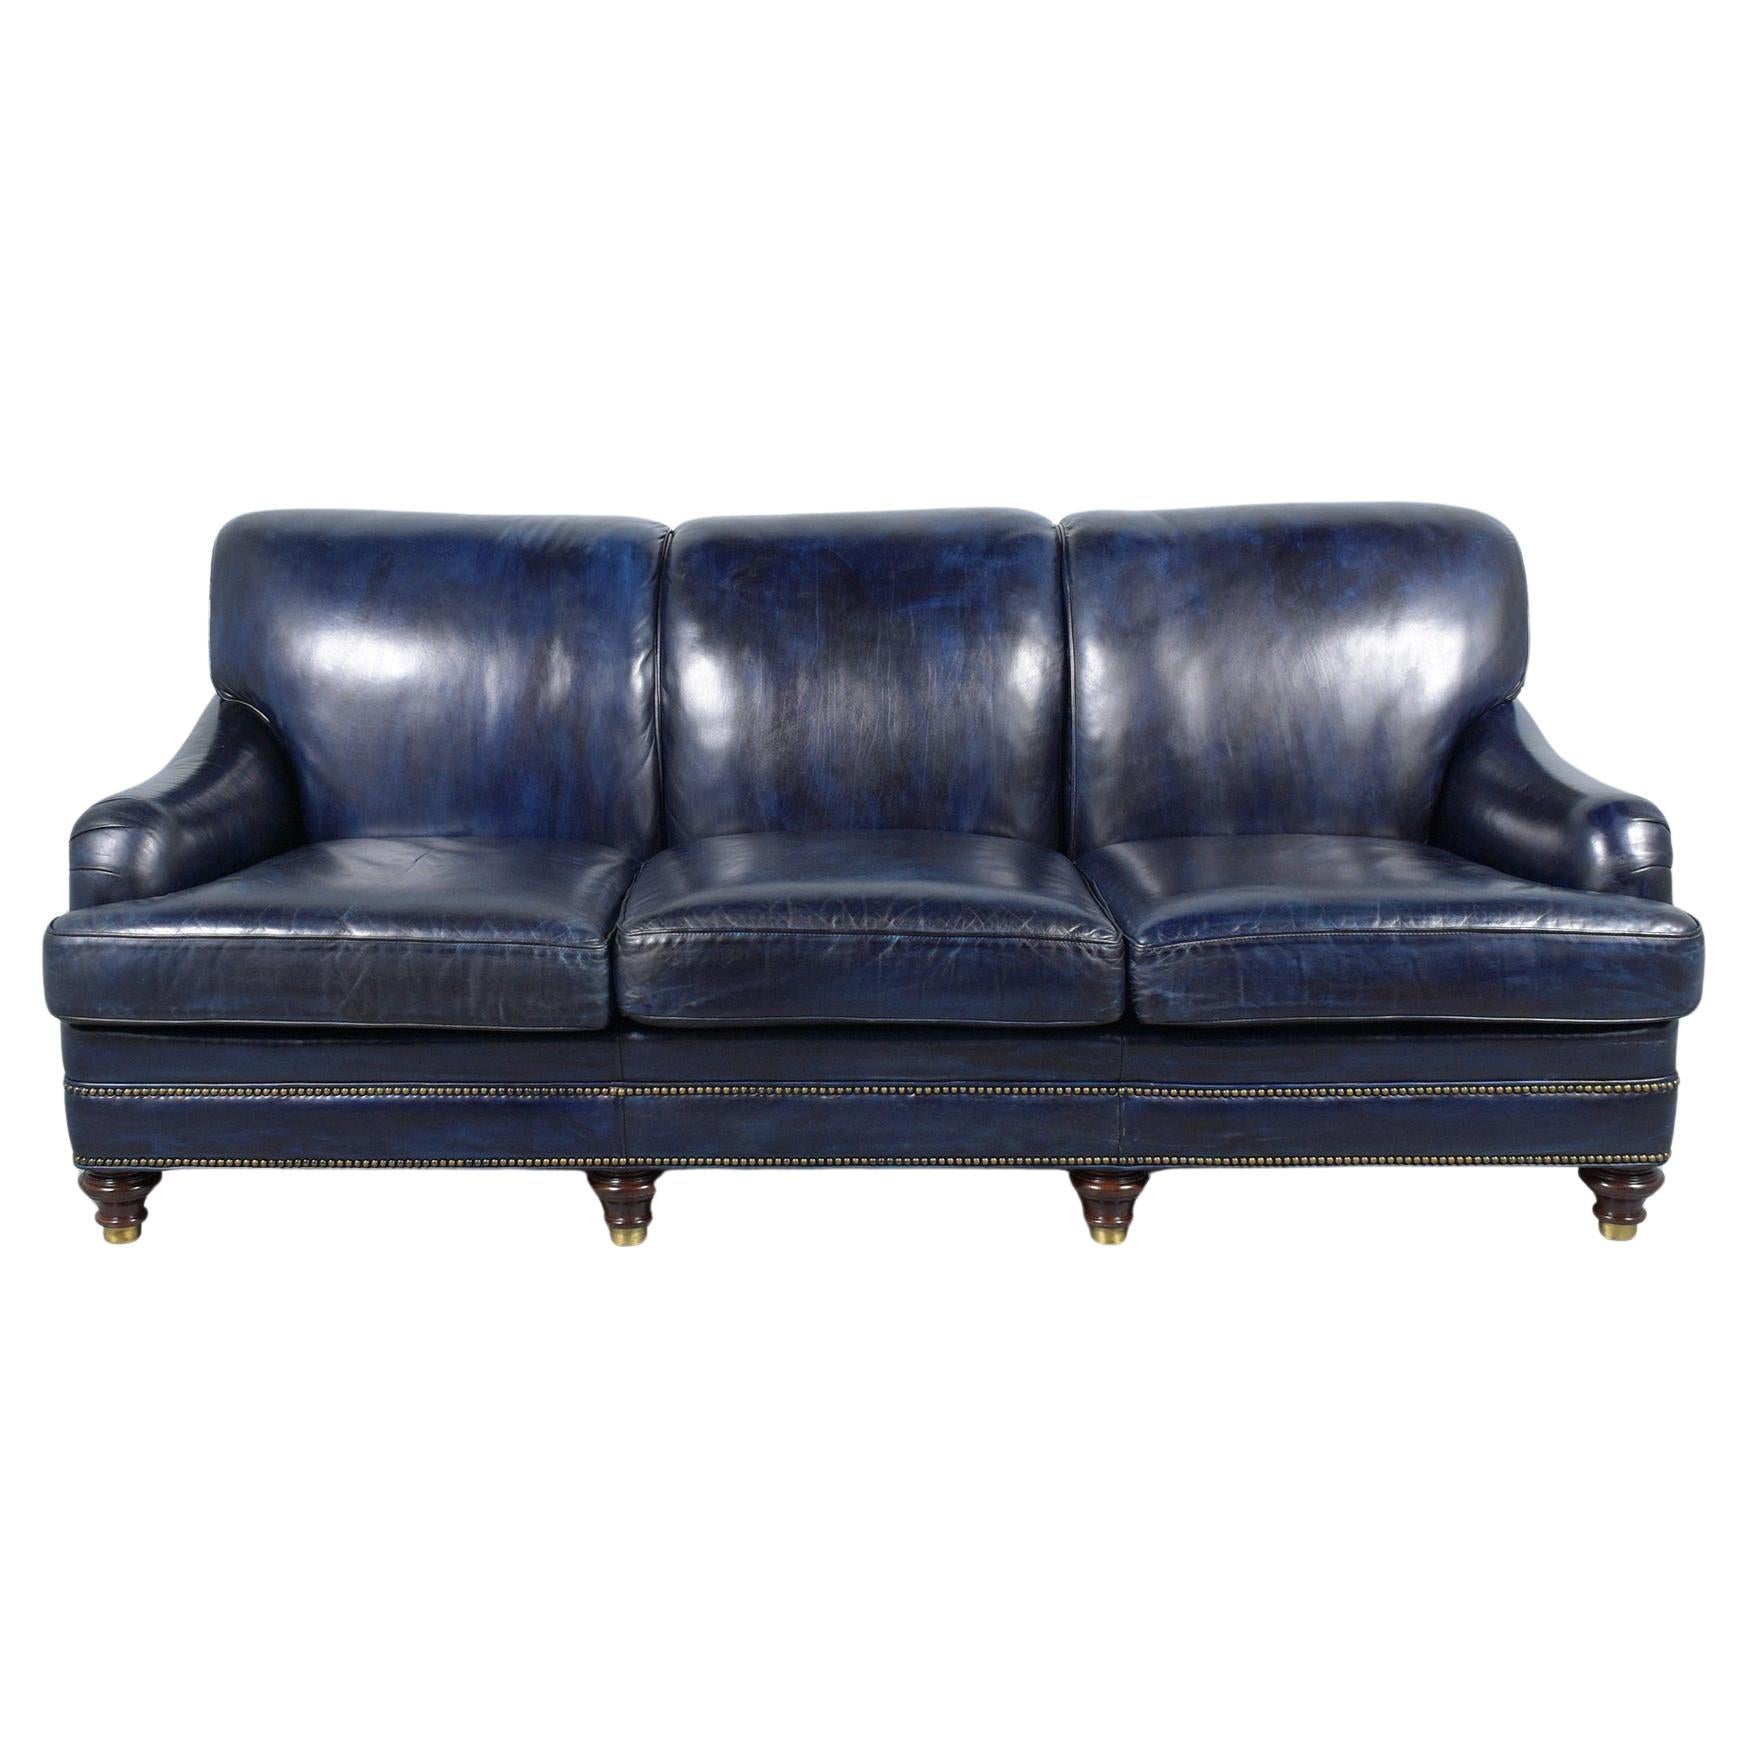 Experience the epitome of English luxury with our Hancock & Moore Three-Seat Sofa, a stunning representation of late 20th-century classic elegance. This exquisite piece showcases exceptional craftsmanship and an unwavering attention to detail,